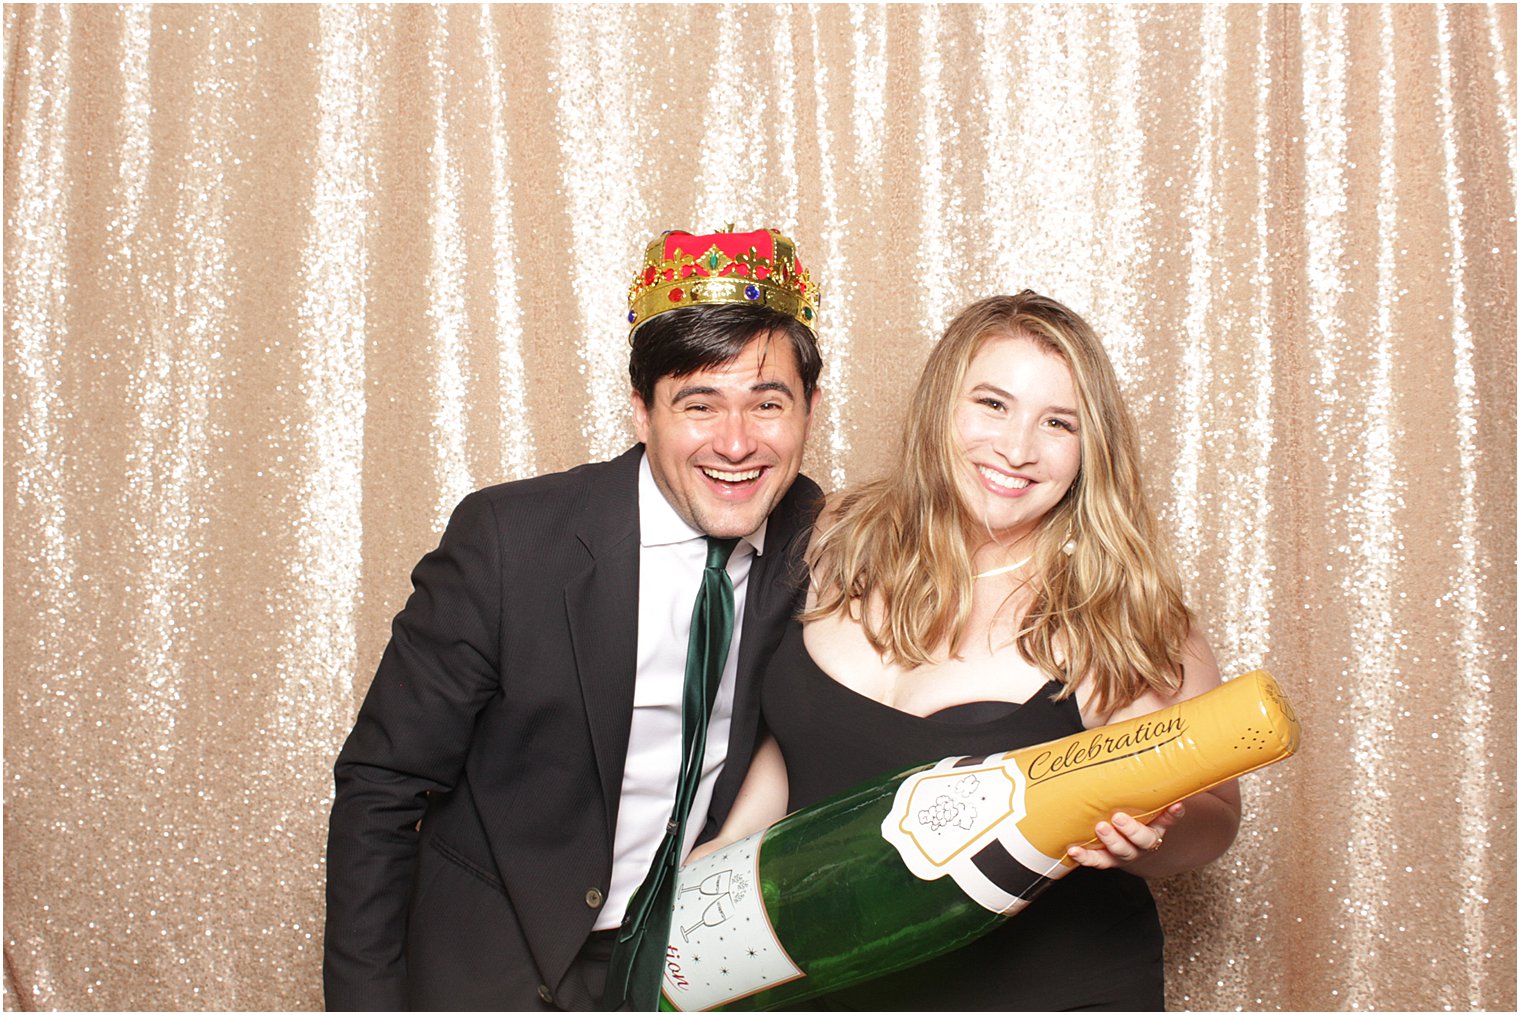 wedding guests pose with inflatable champagne glass during photo booth fun